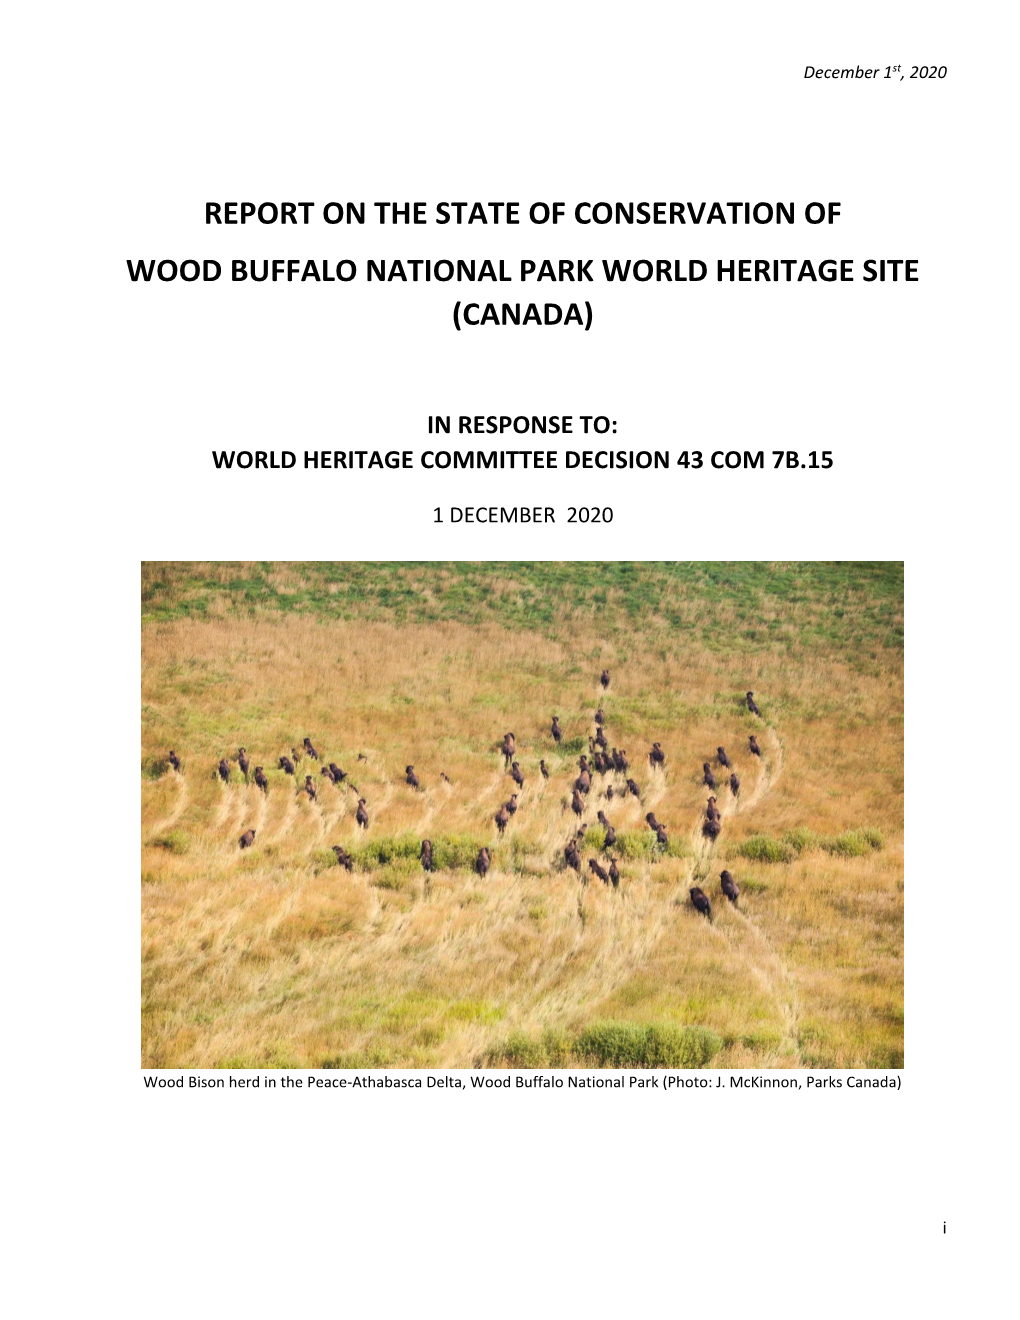 Report on the State of Conservation of Wood Buffalo National Park World Heritage Site (Canada)